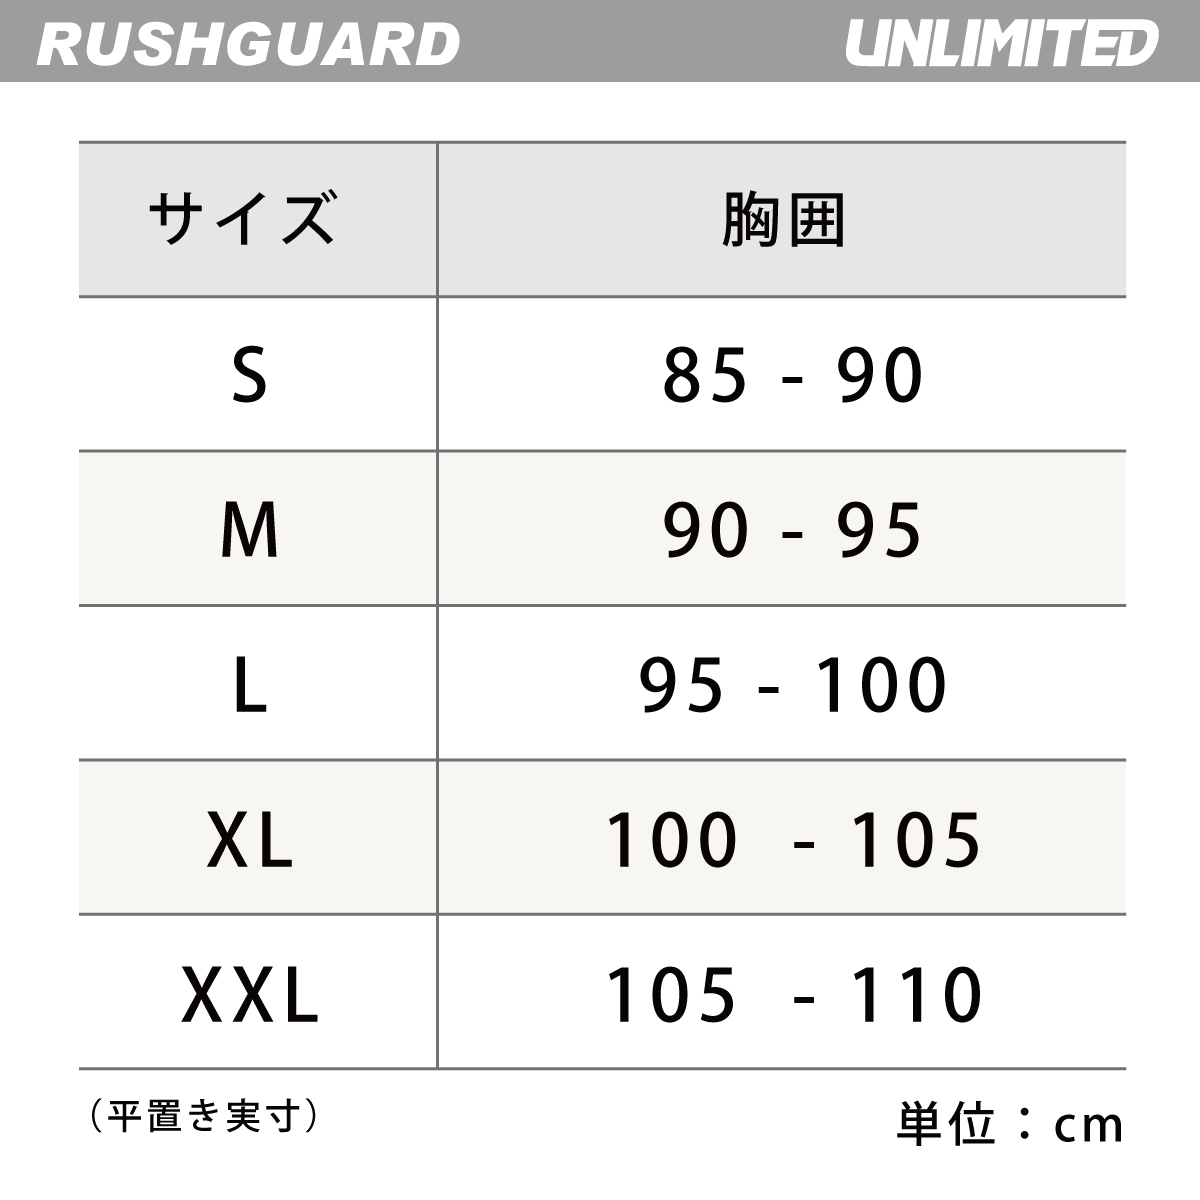 UNLIMITED HYDRO HOODIE Rush Parka Men's Hooded Rash Guard Front Zipper Unlimited ULR0402